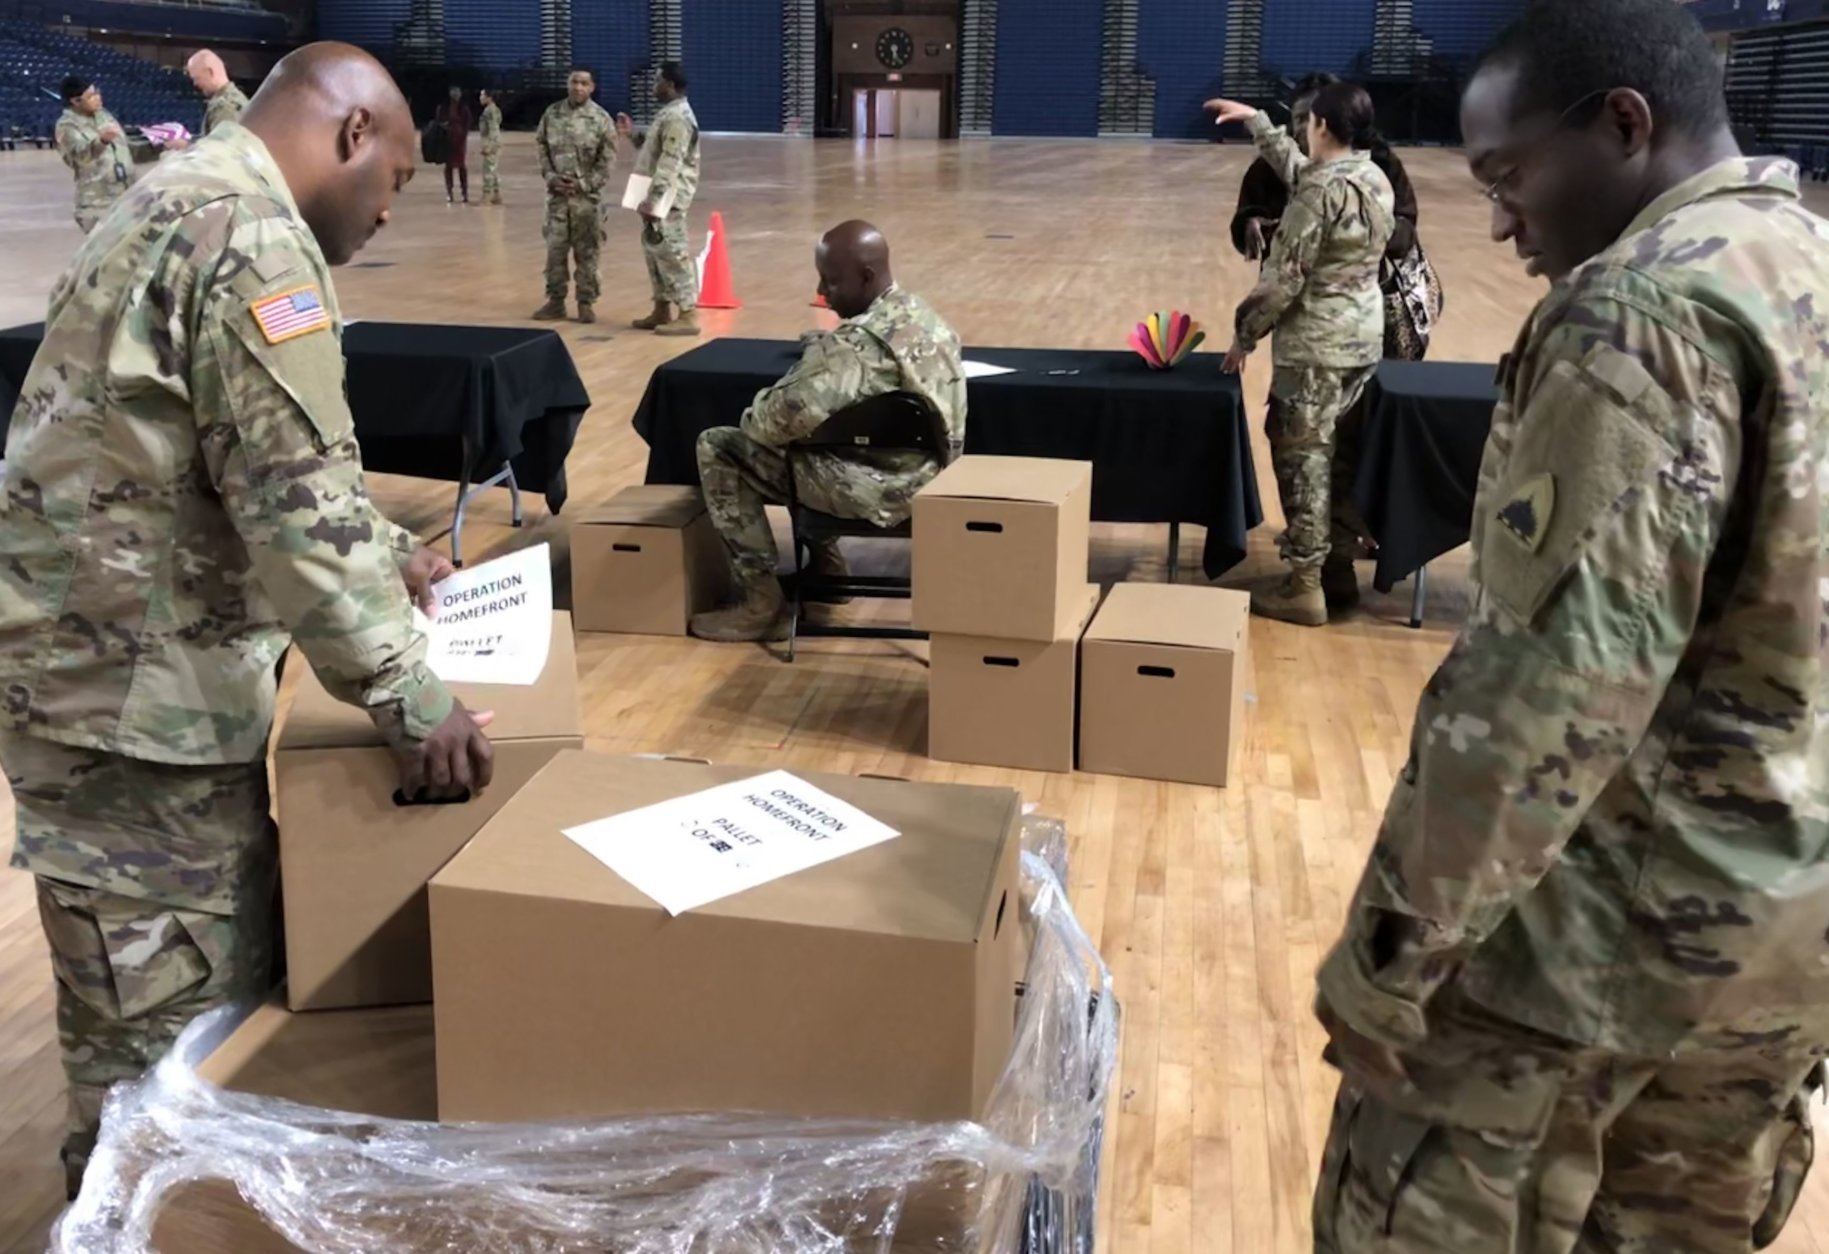 Operation Homefront distributed 400 holiday meals to D.C. National Guard military families on Monday, through the Holiday Meals for Military program. (WTOP/Kristi King)